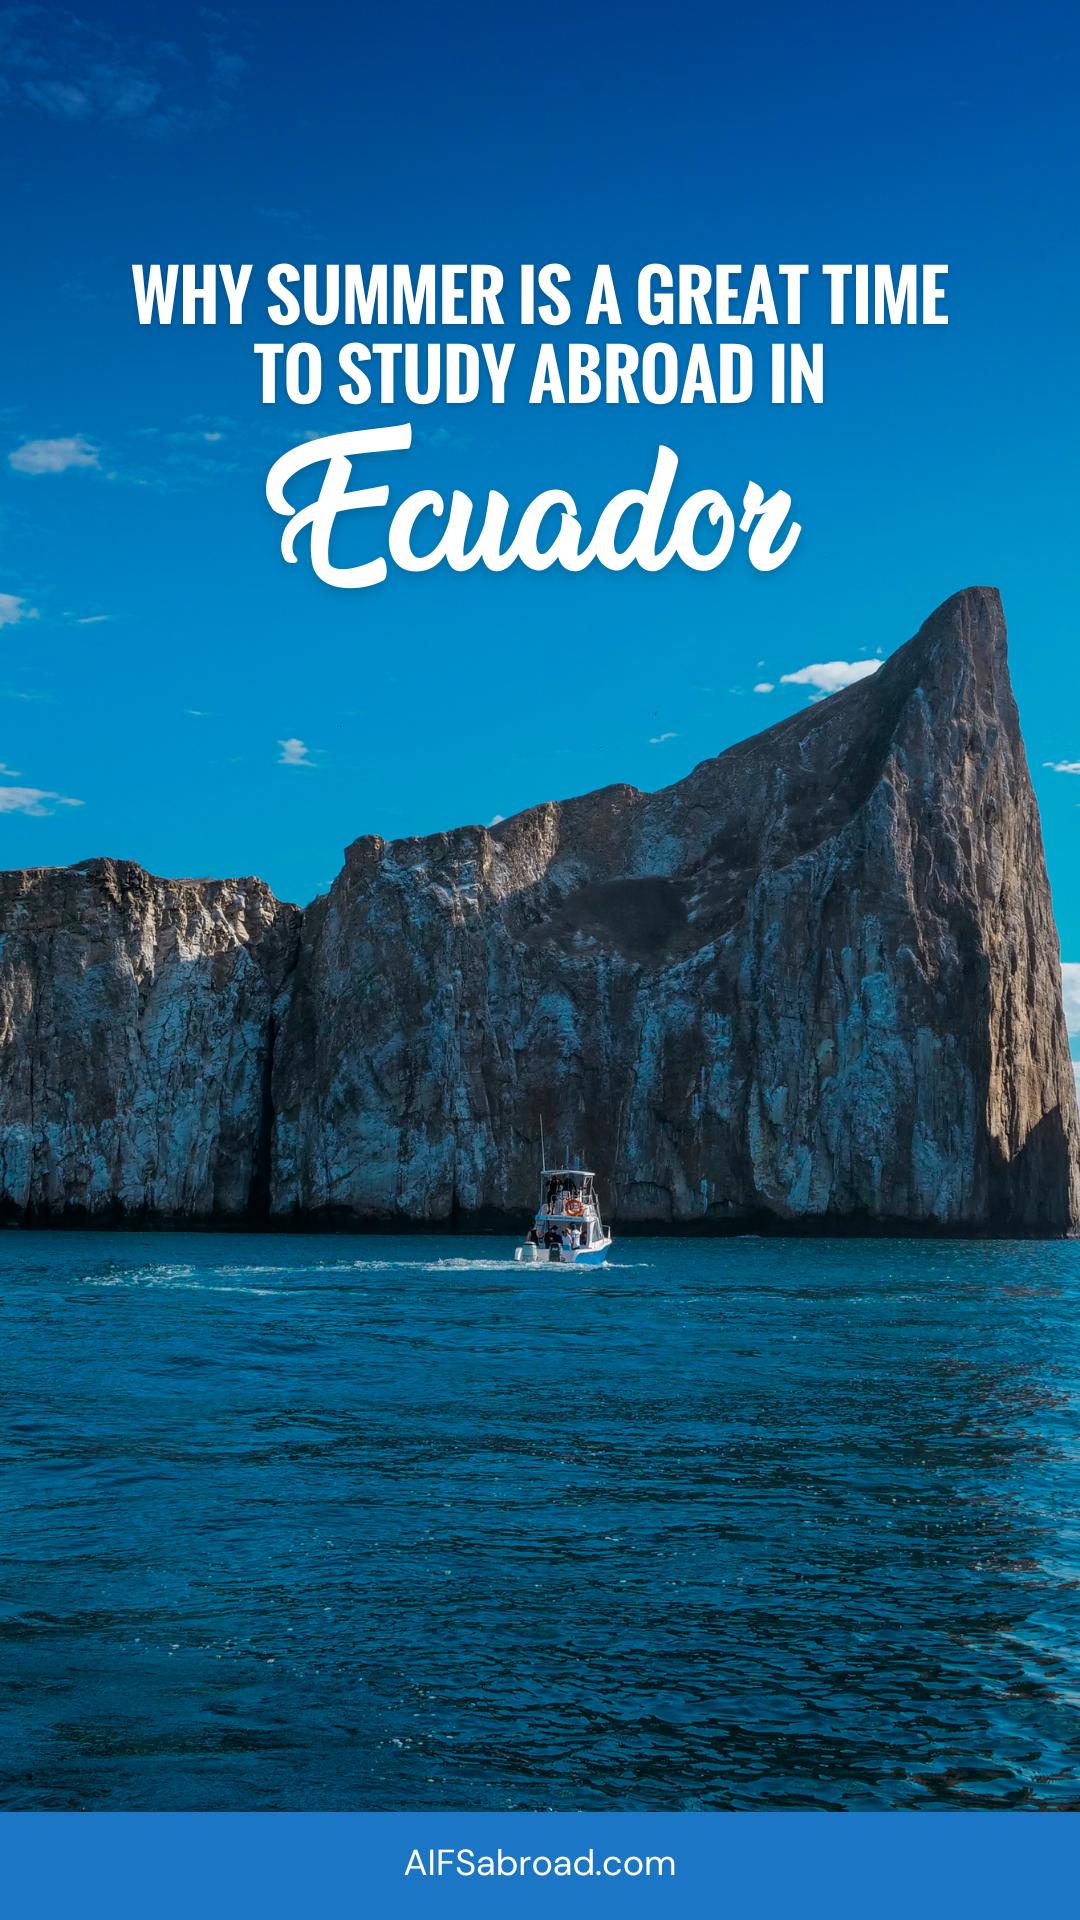 Pin Image: Oceanscape in Galápagos Islands with text overlay "Why Summer is a Great Time to Study Abroad in Ecuador - AIFS Abroad"